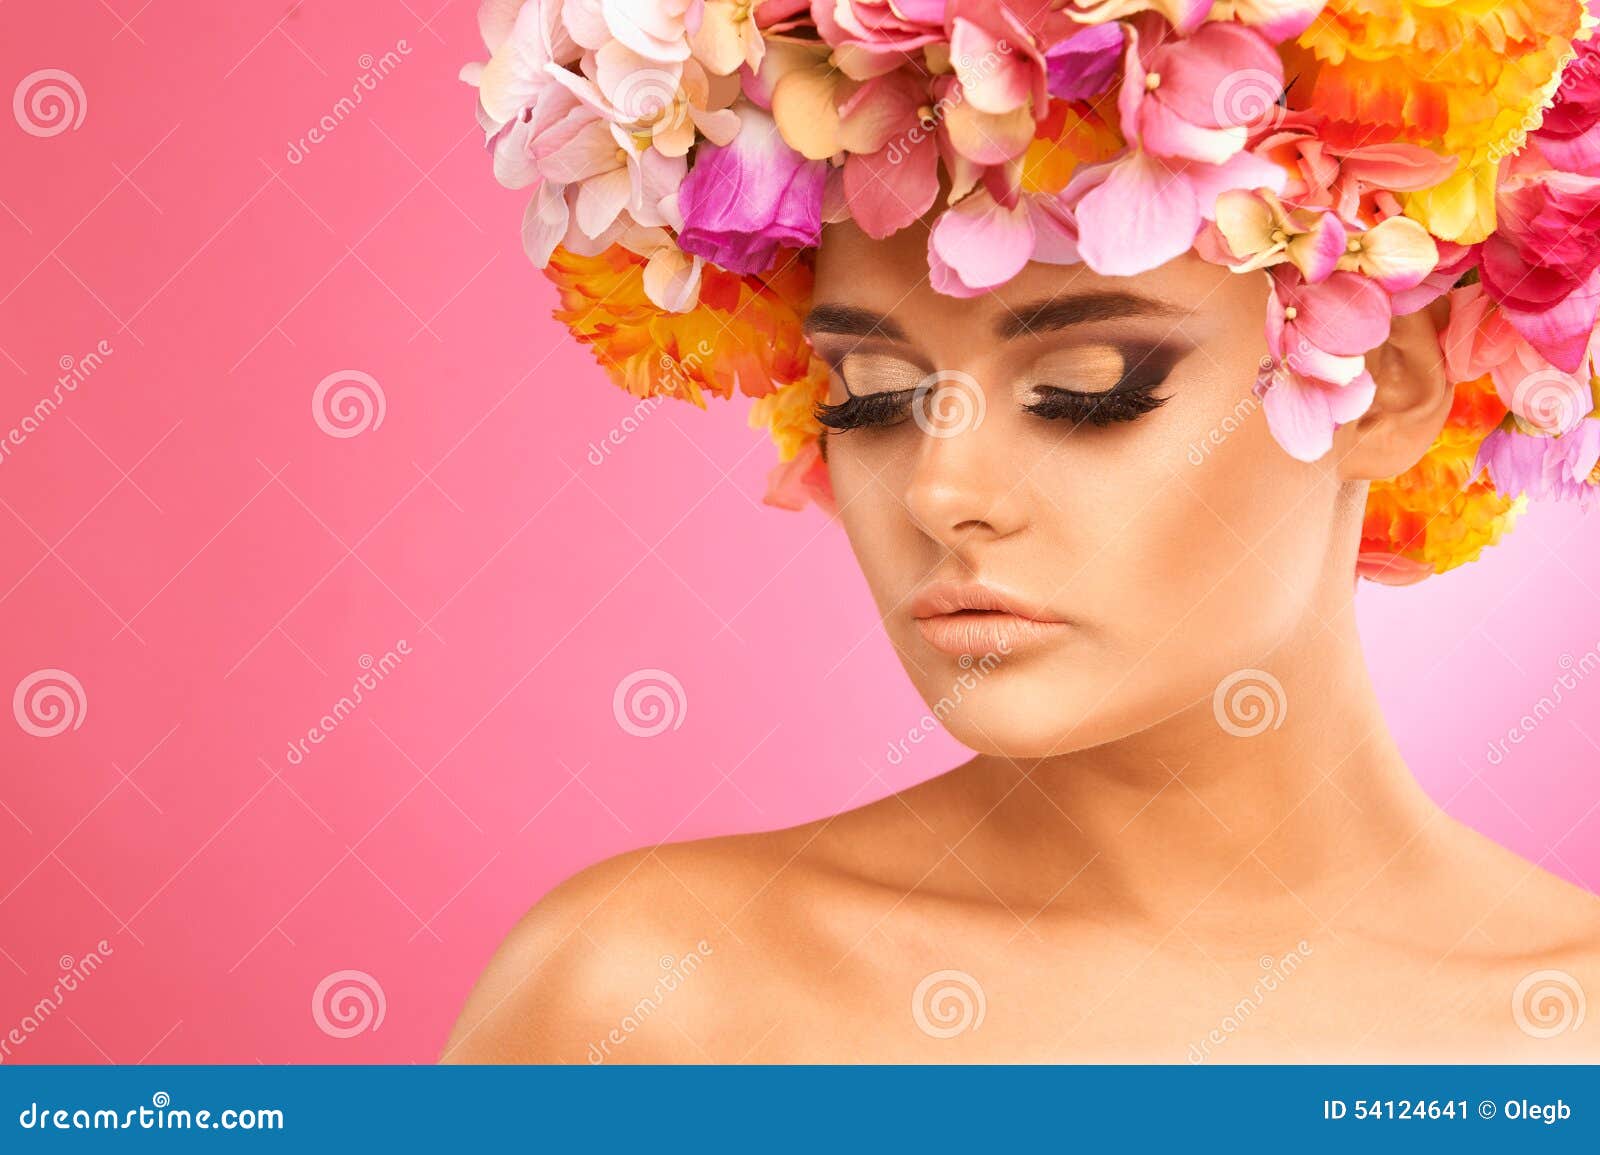 Beautiful Woman With Flower Wreath Stock Image Image Of Model Eyes 54124641